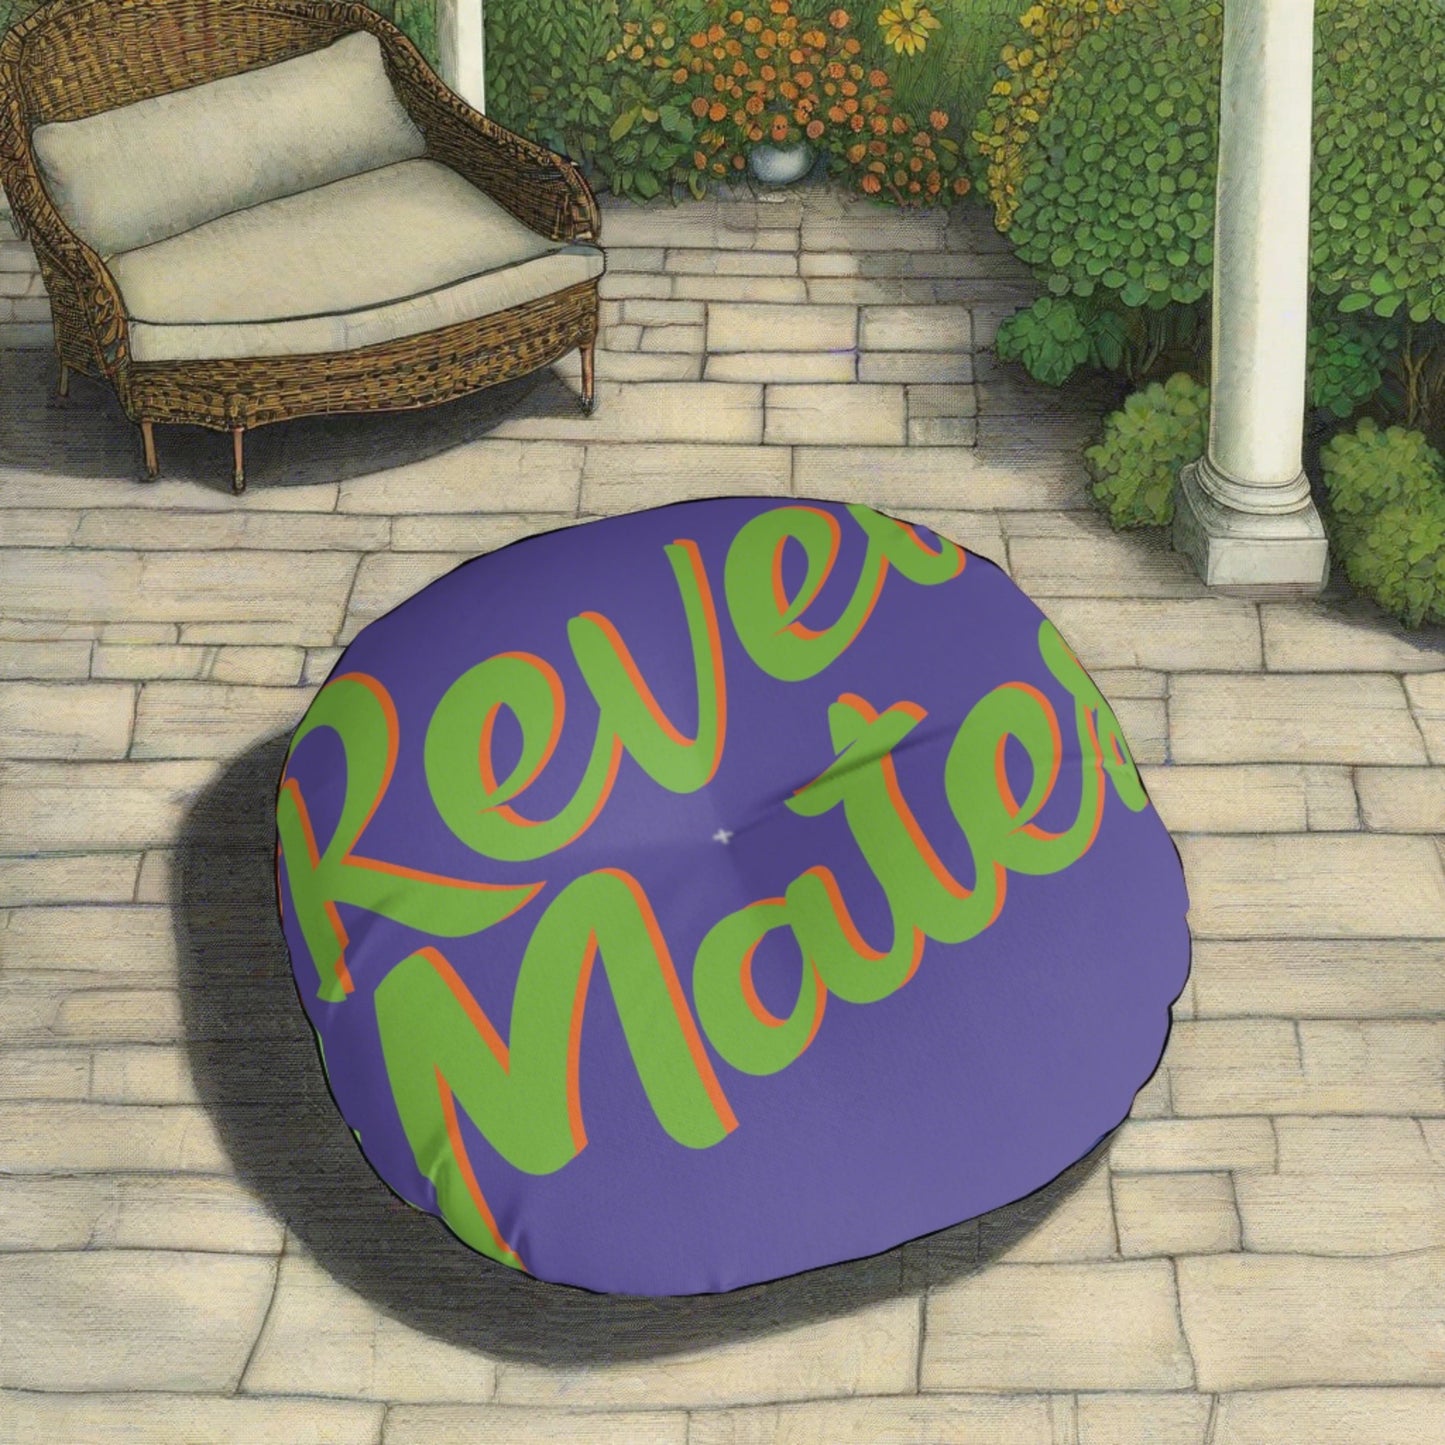 Round Tufted Floor Pillow | for Pets and Companions | Lavender & Lime RevelMates Design